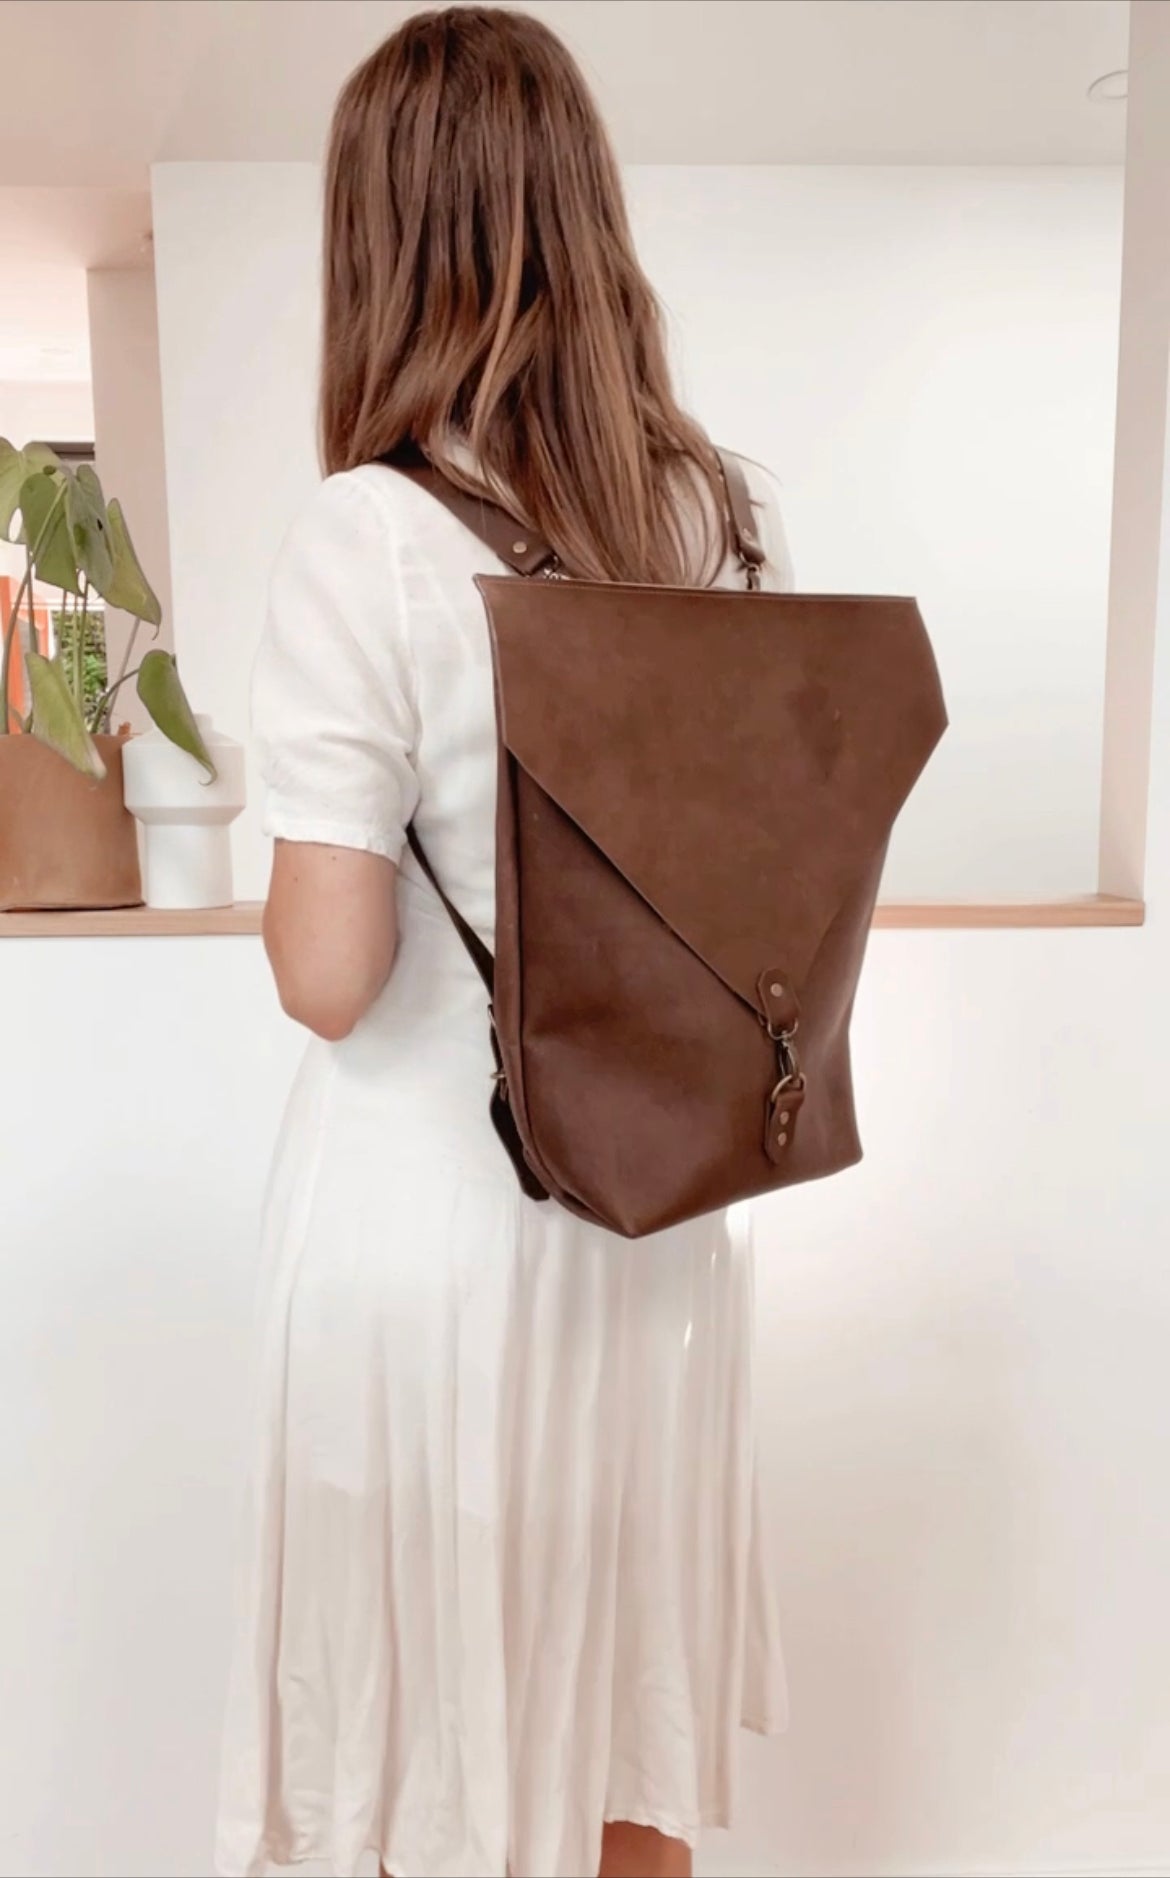 The Back Pack in Dark Brown Leather Bag - handcrafted by Market Canvas Leather in Tofino, BC, Canada